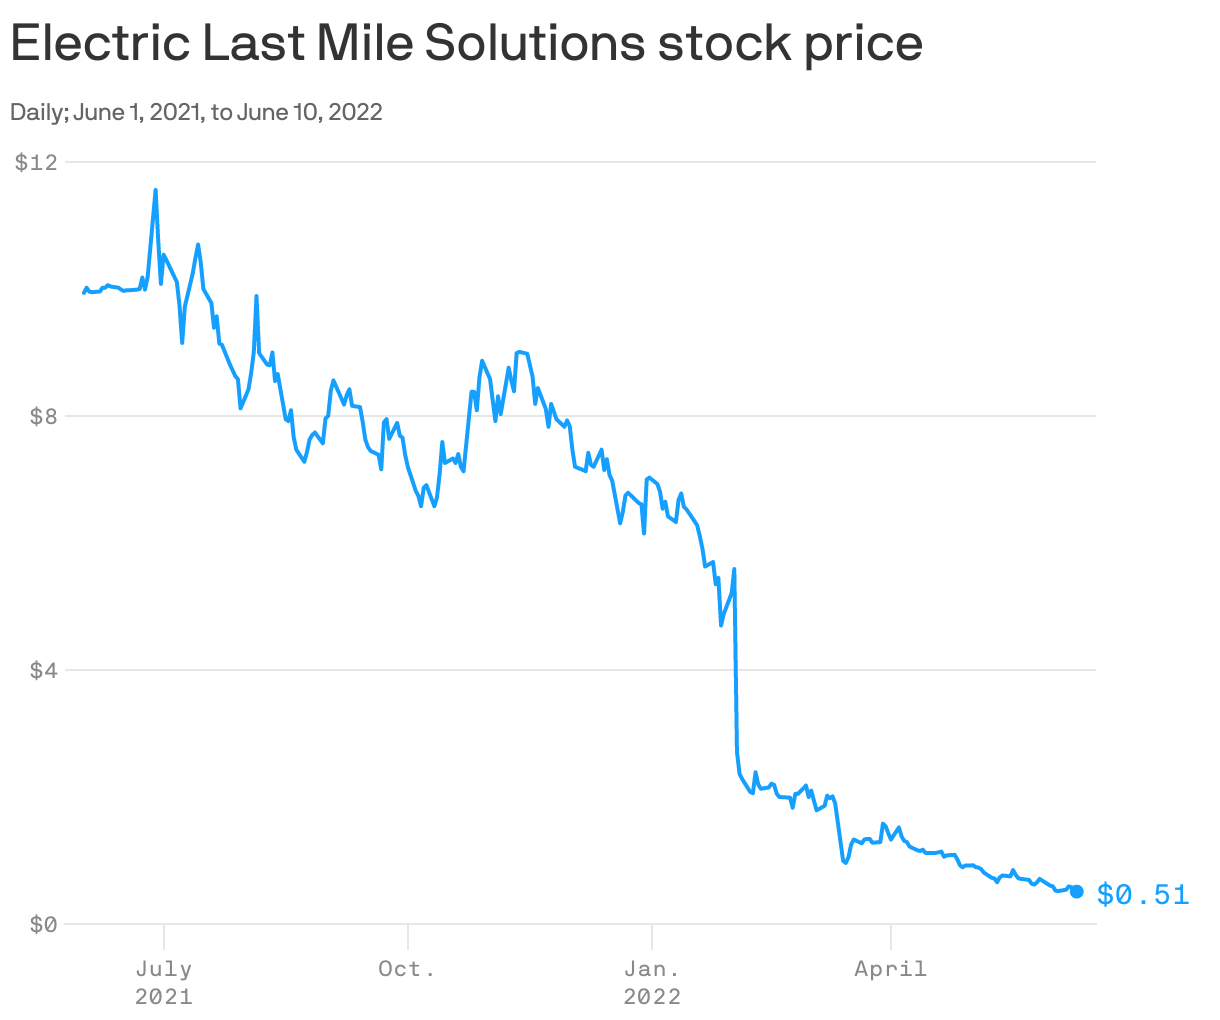 Electric Last Mile Solutions stock price